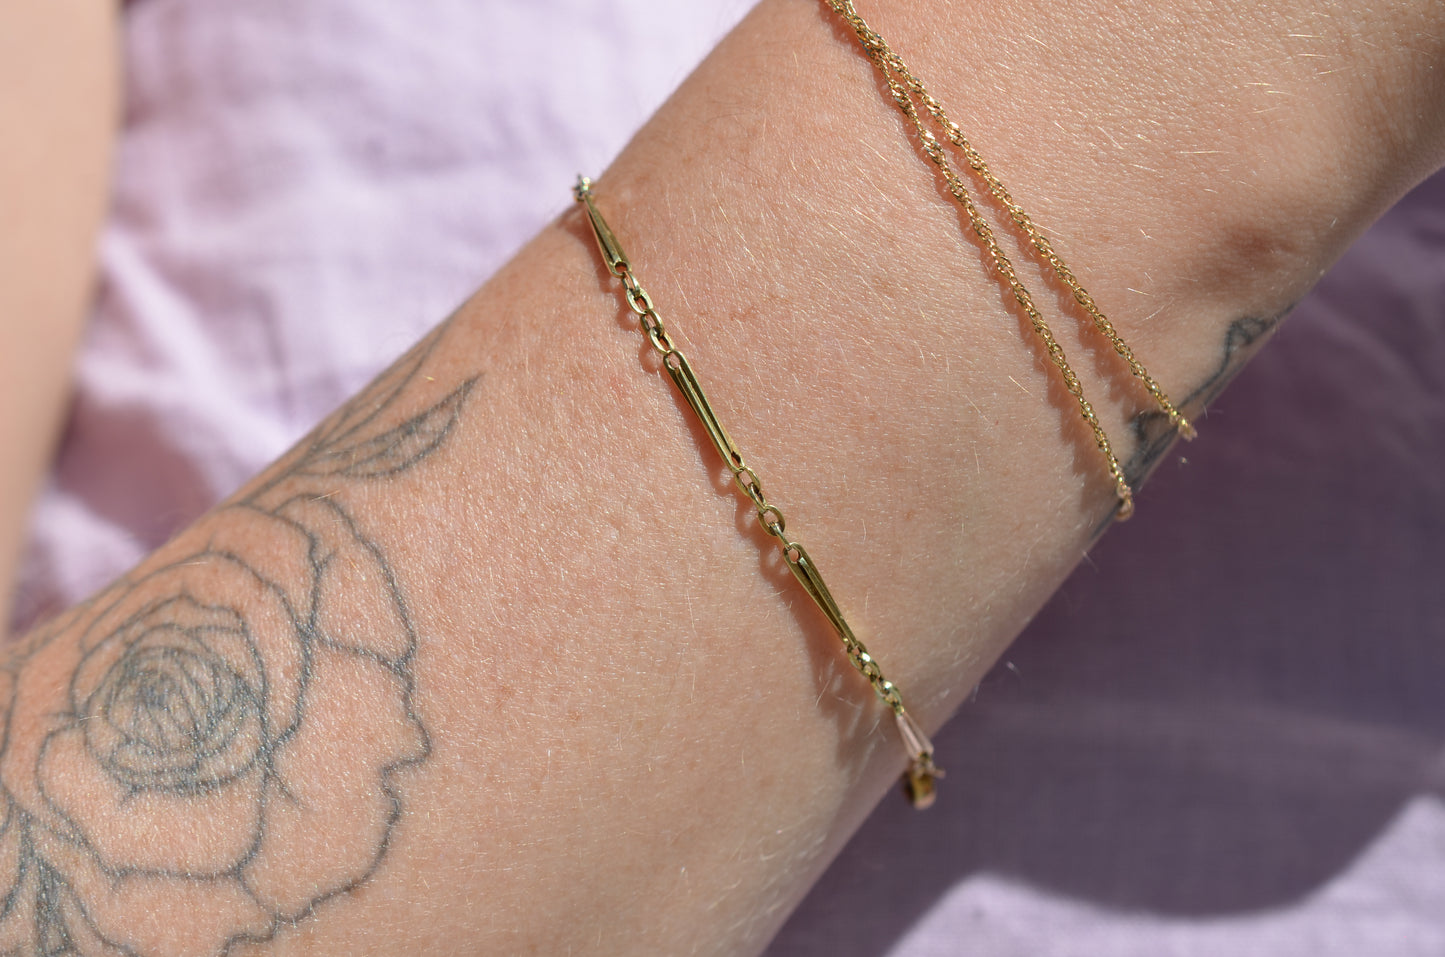 A closely cropped view of the bracelet on a Caucasian model's wrist. She is wearing several other gold bracelets and has a floral tattoo on her forearm.